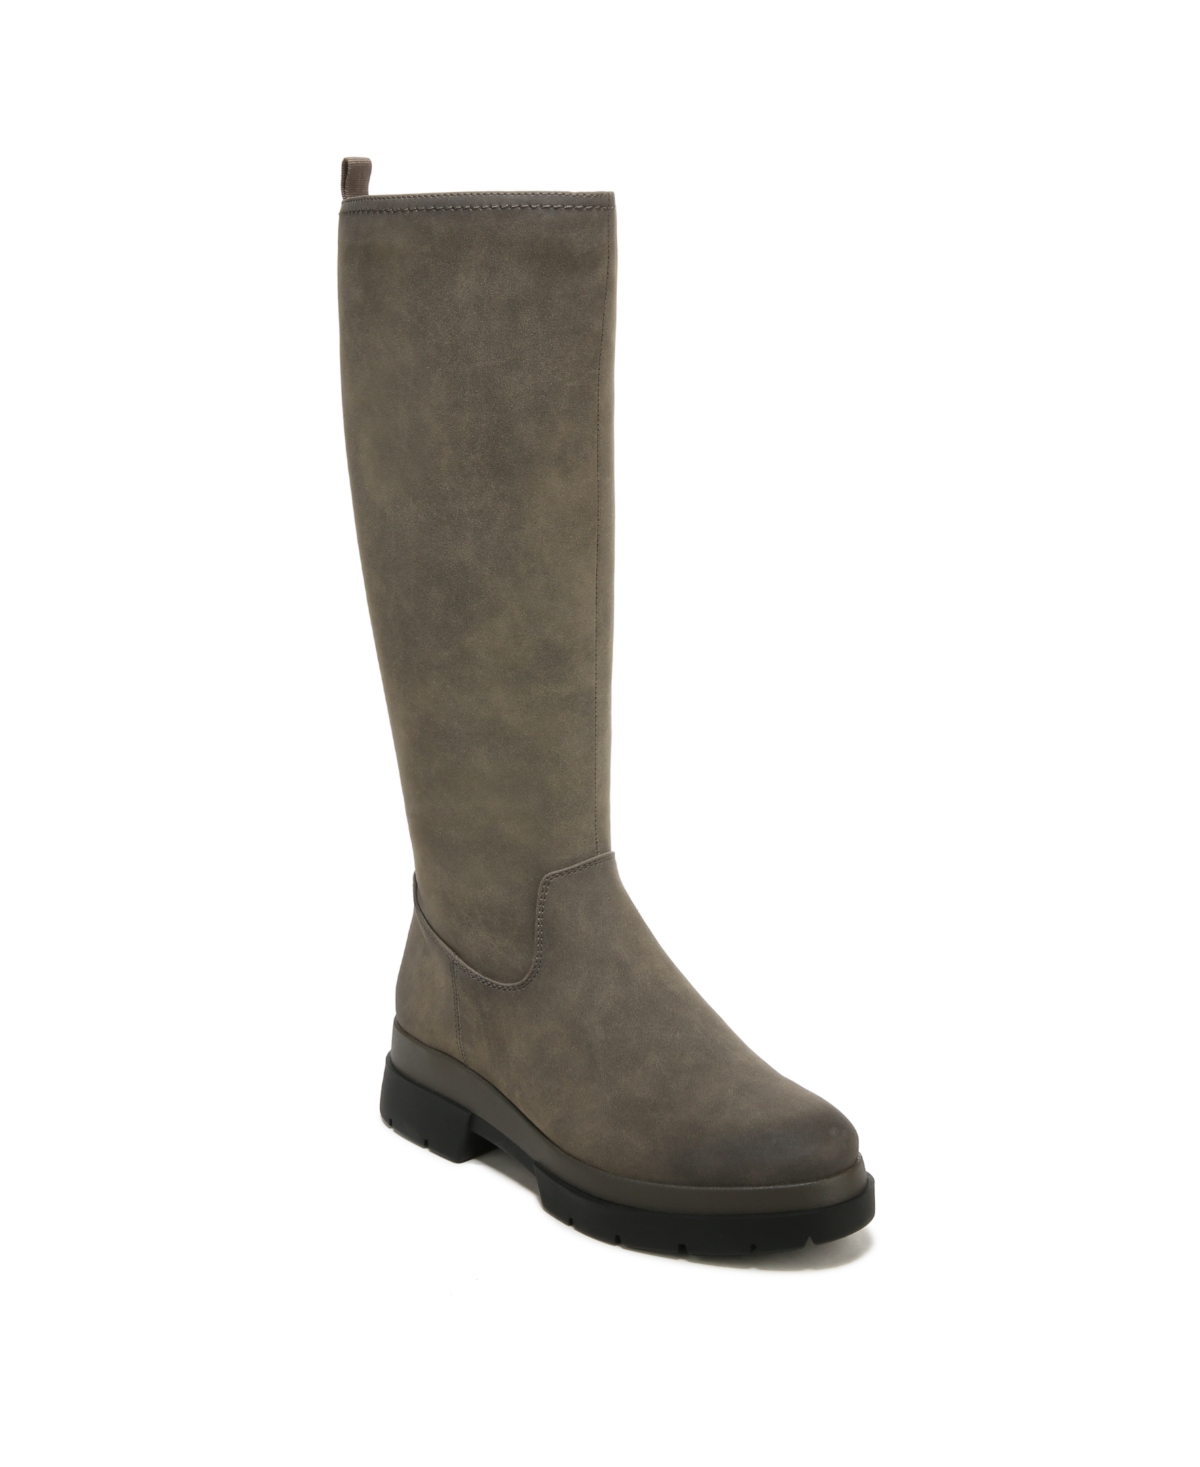 Orchid Wide Calf High Shaft Boots - Dark Olive Faux Nubuck